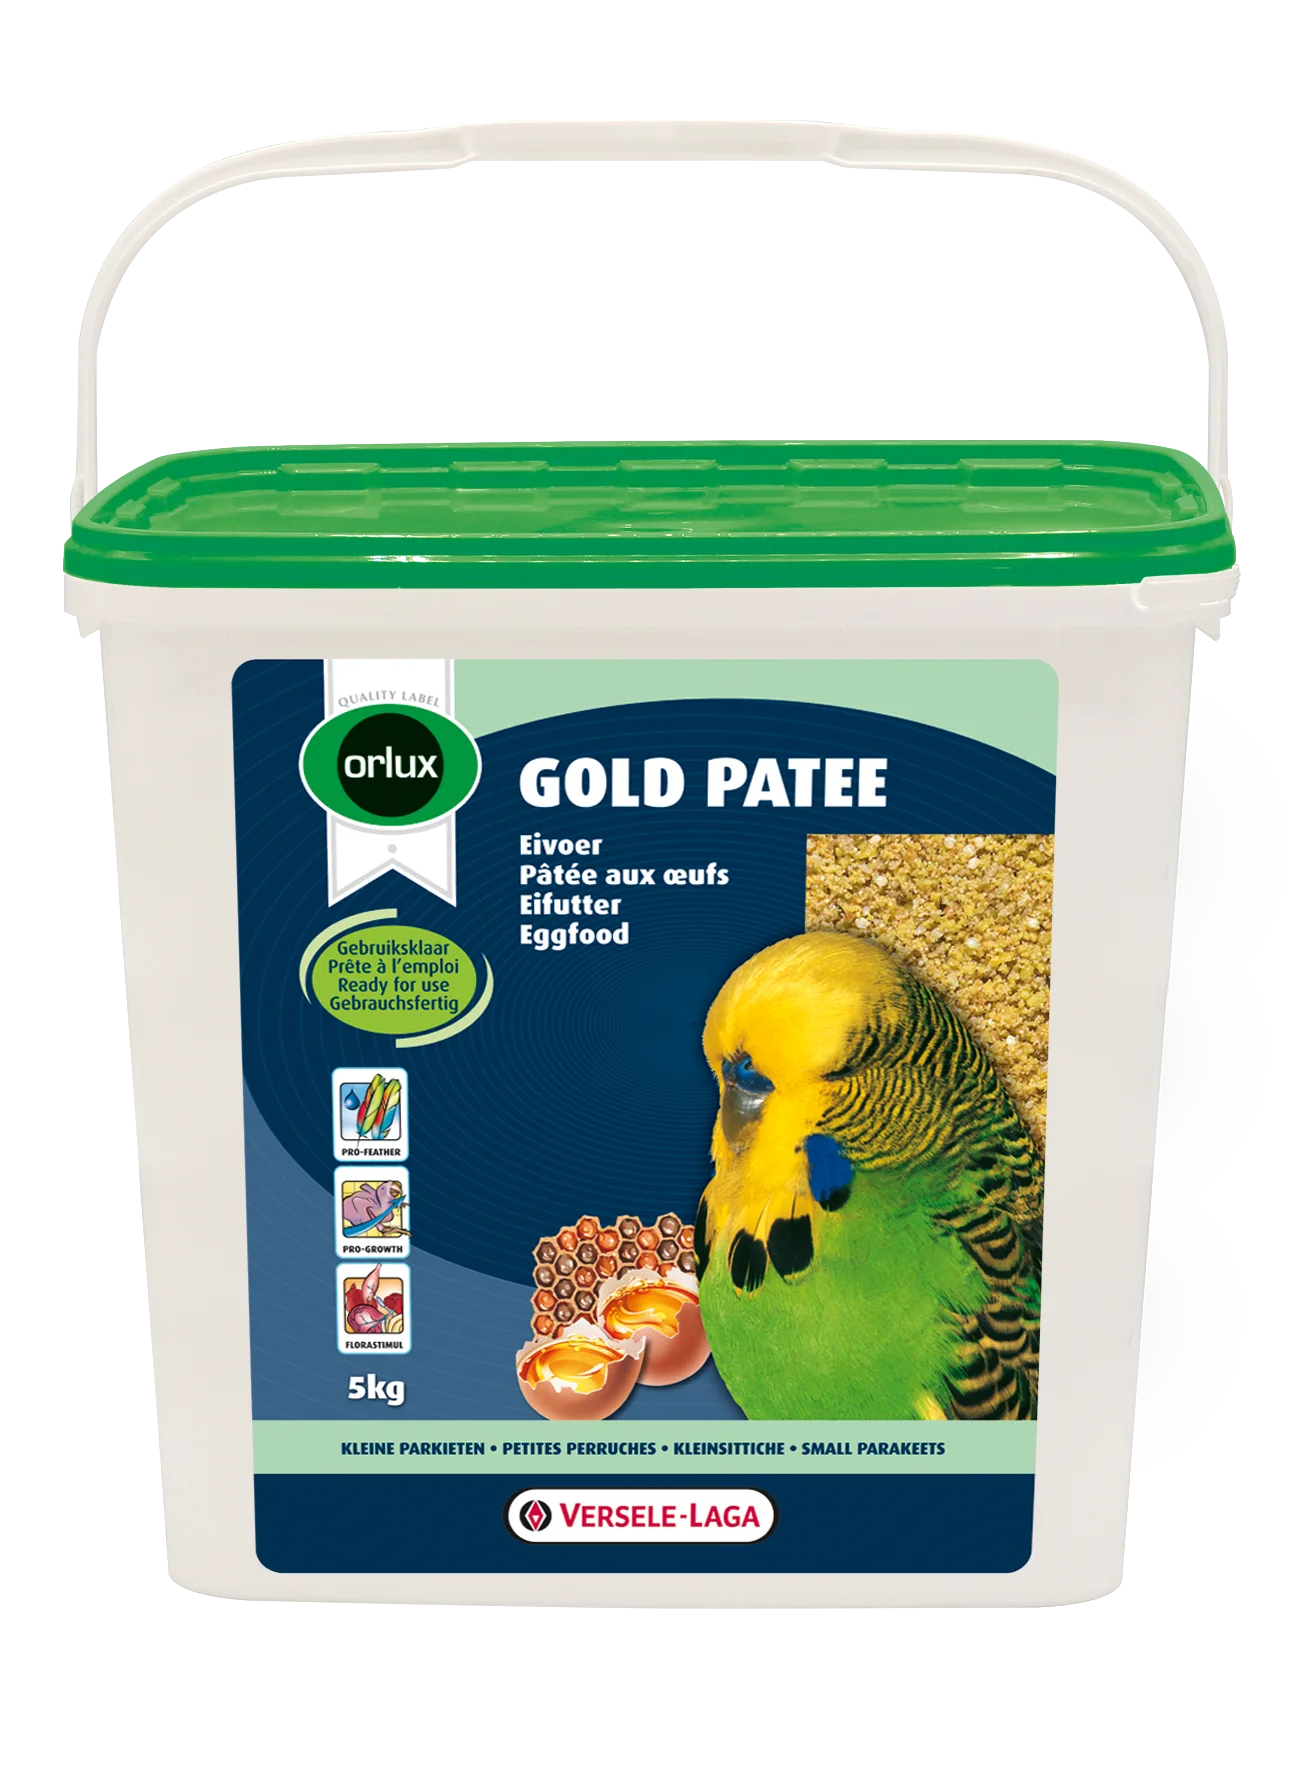 Gold Patee Budgies & Small Parakeets 5 KG